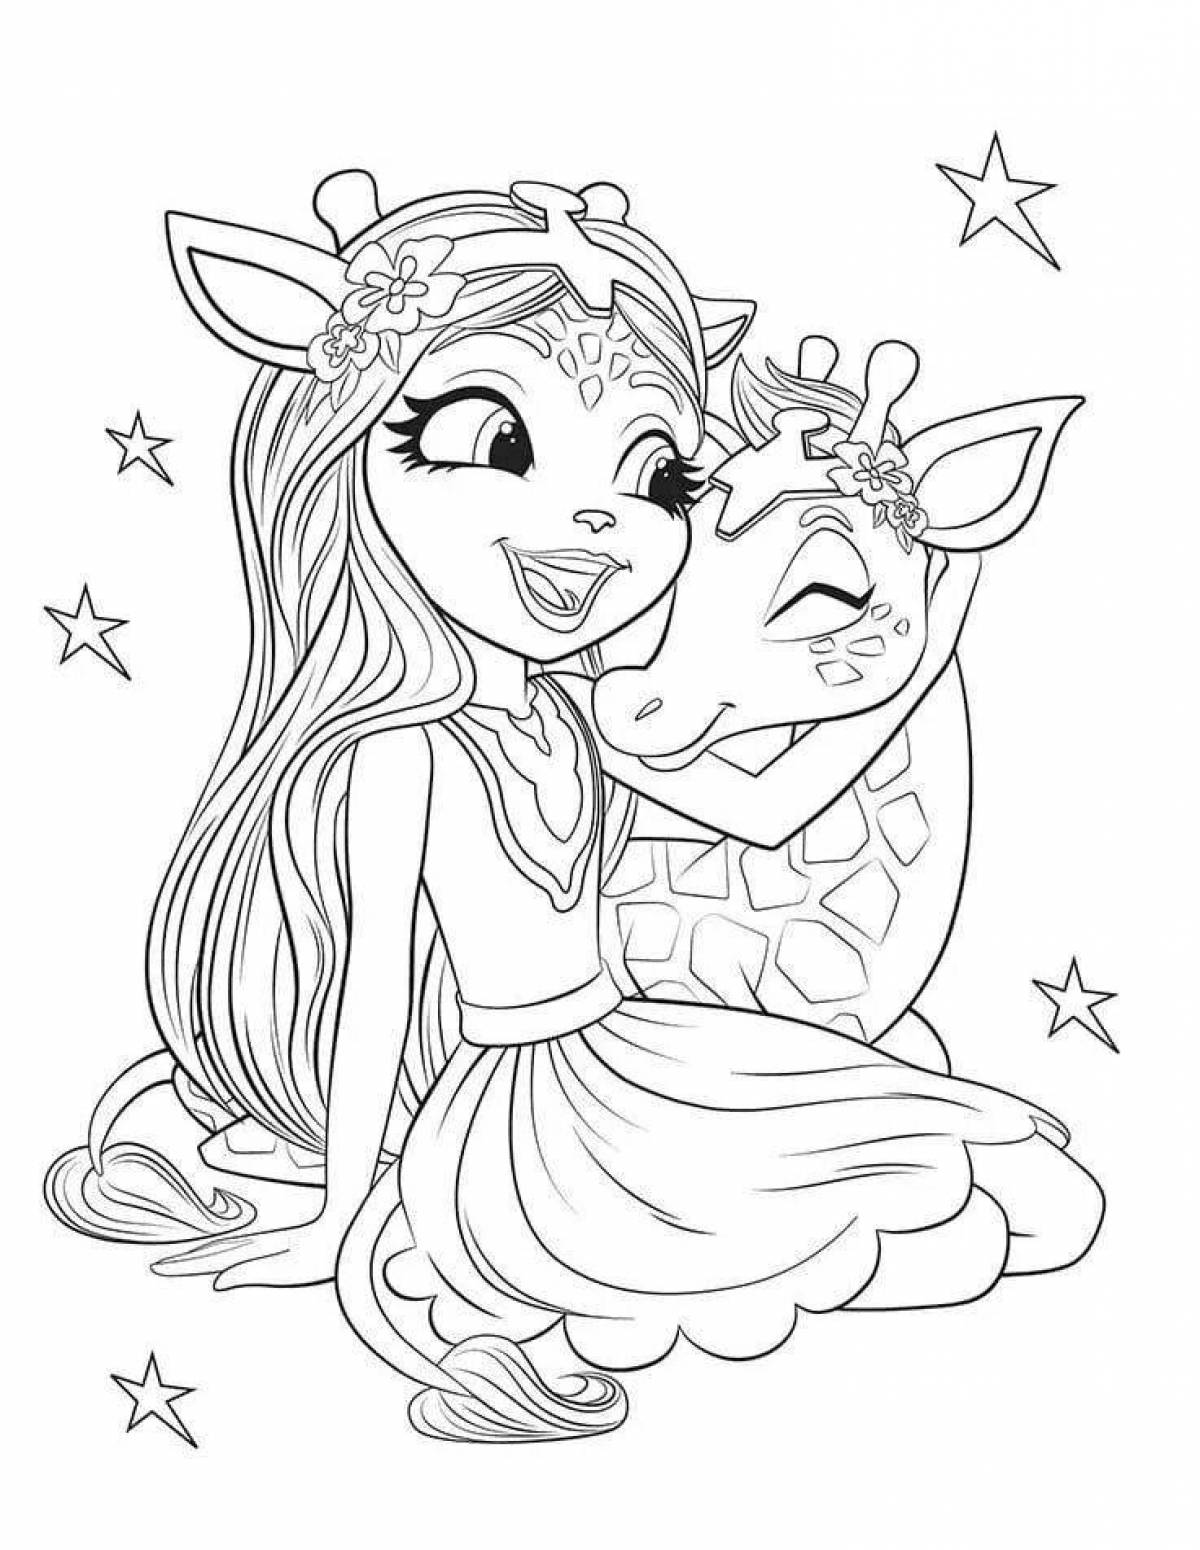 Lovely enchantimals cat coloring page